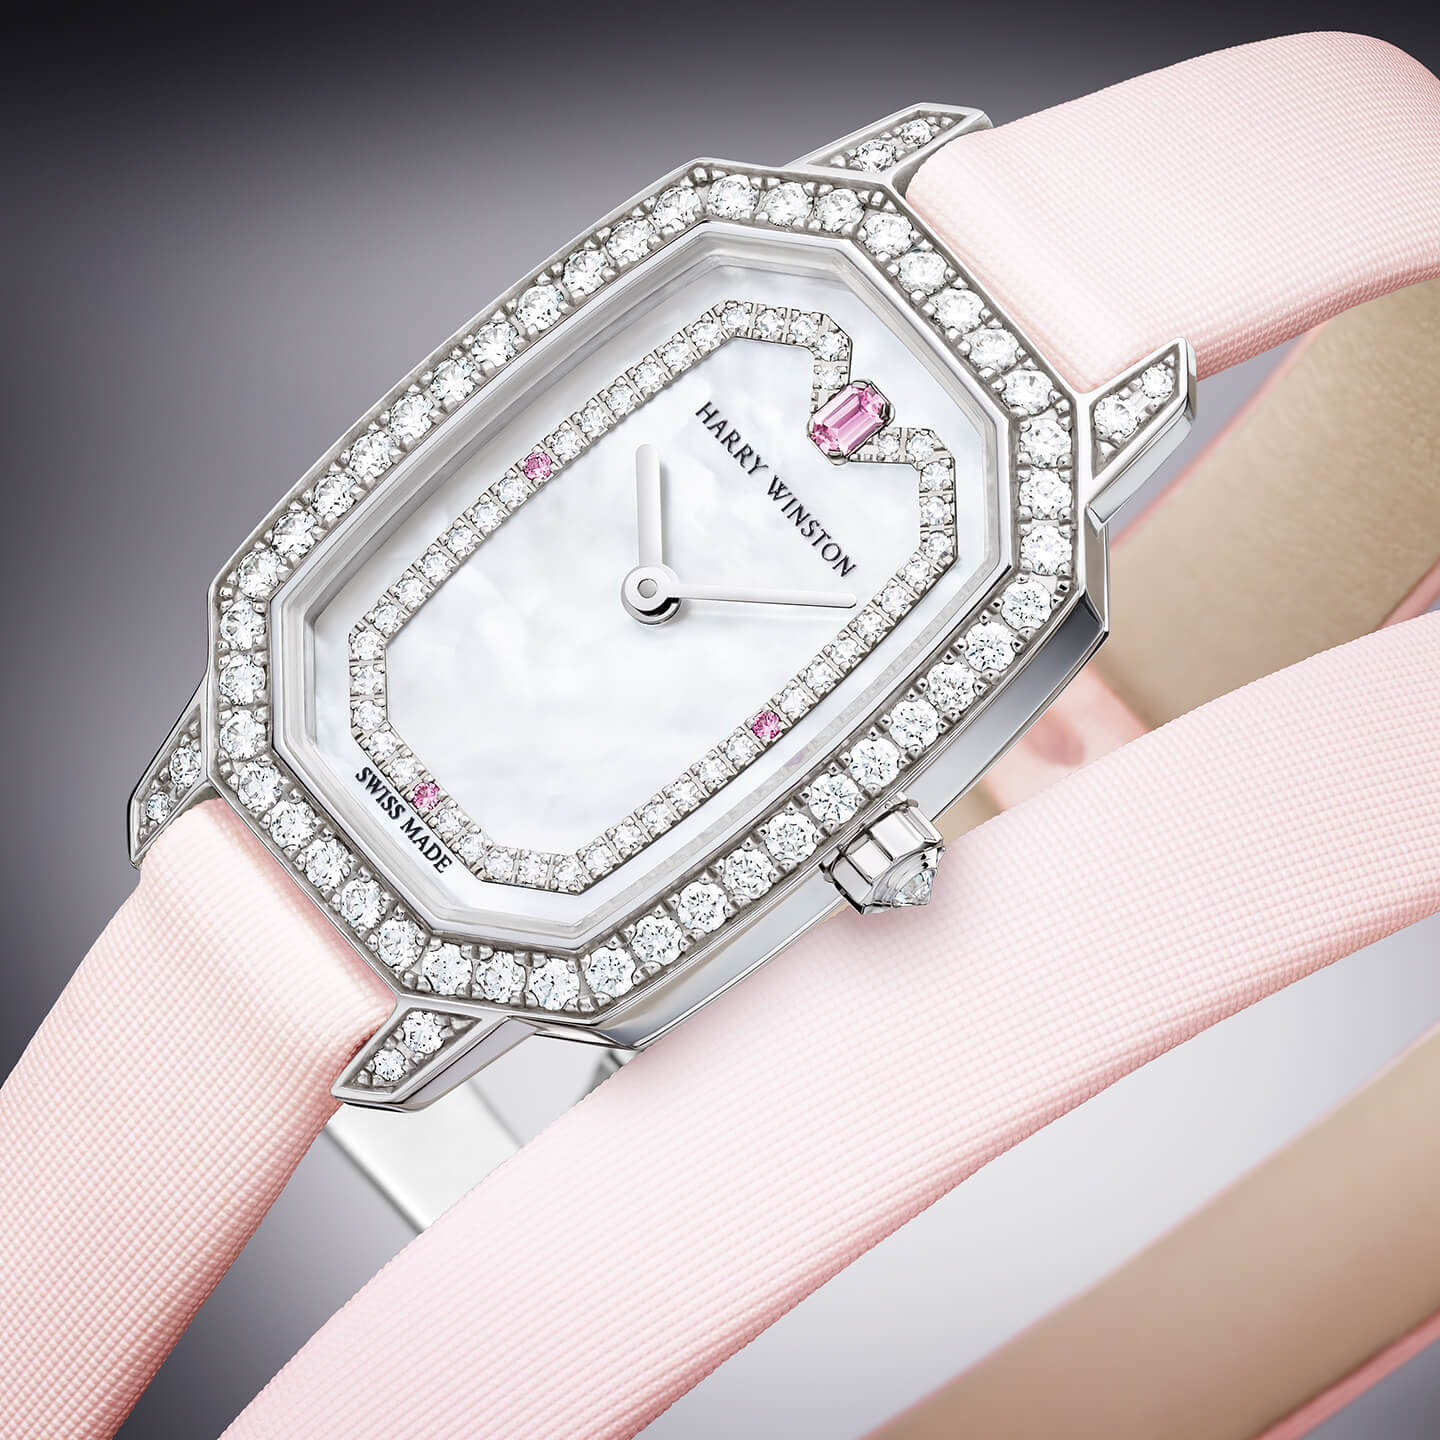 Harry Winston introduces the first new timepiece of its 2018 collection